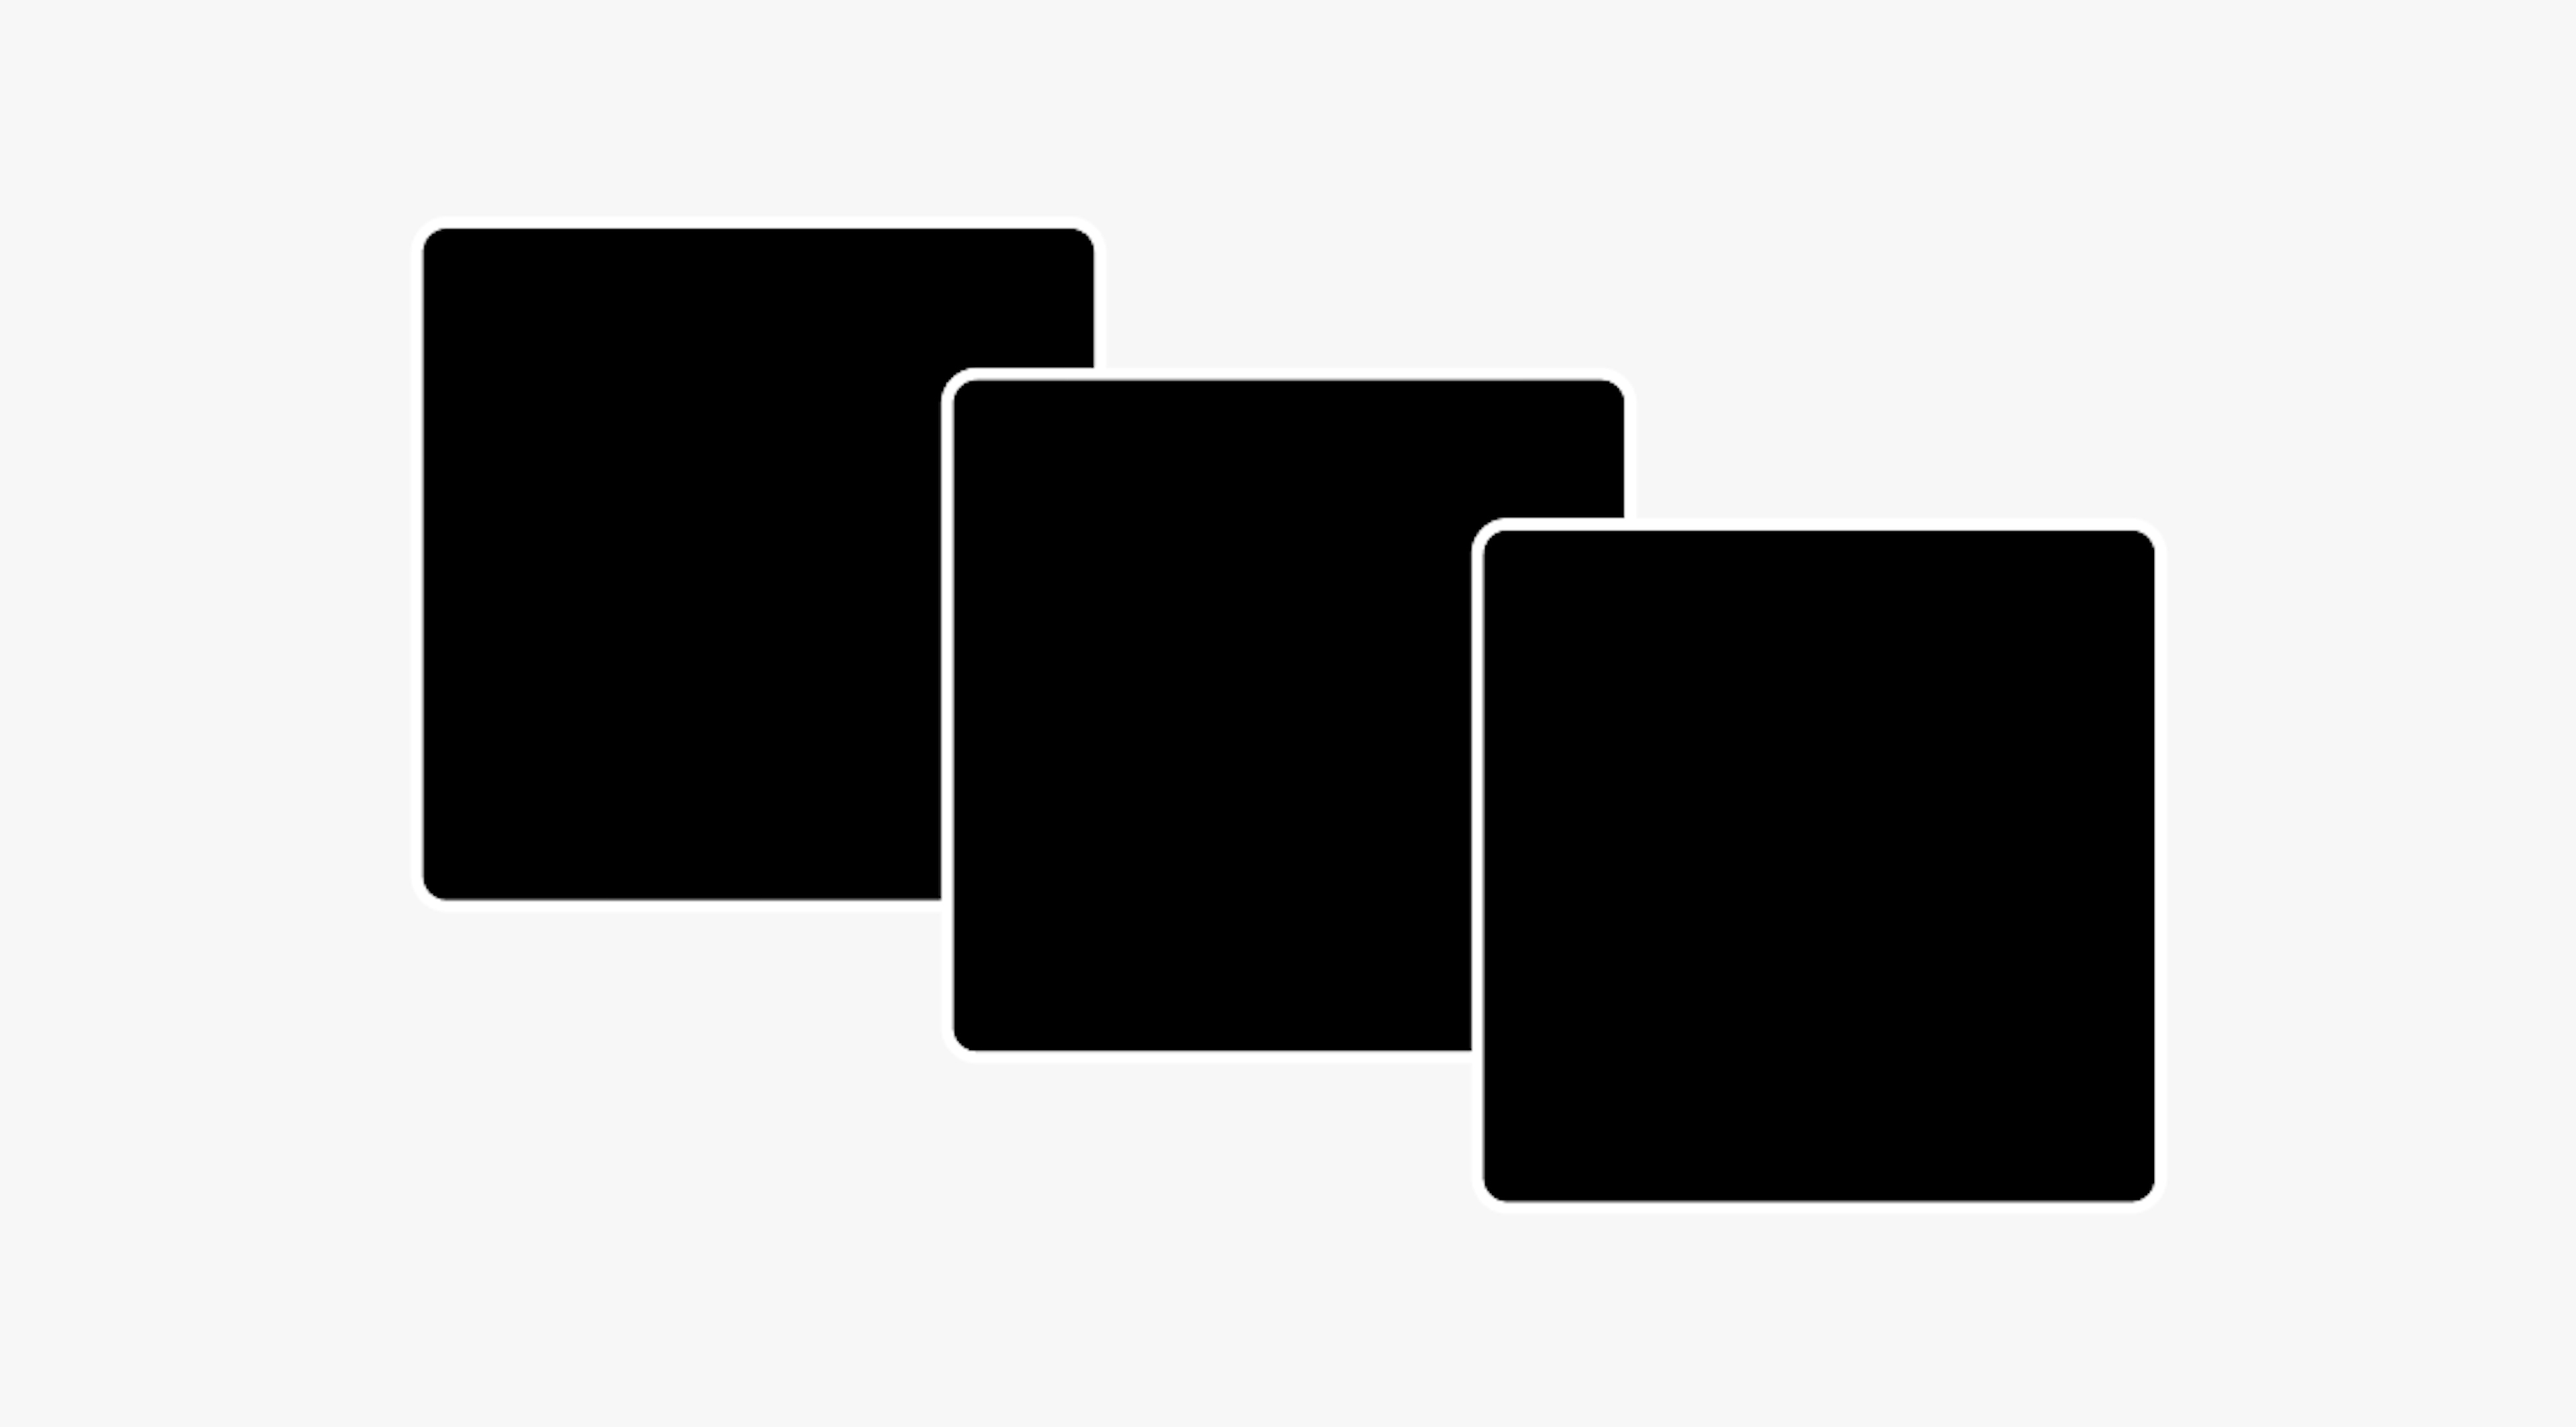 Graphic, black squares stacked in a uniform manner. They are all the same size have the same corner radius.